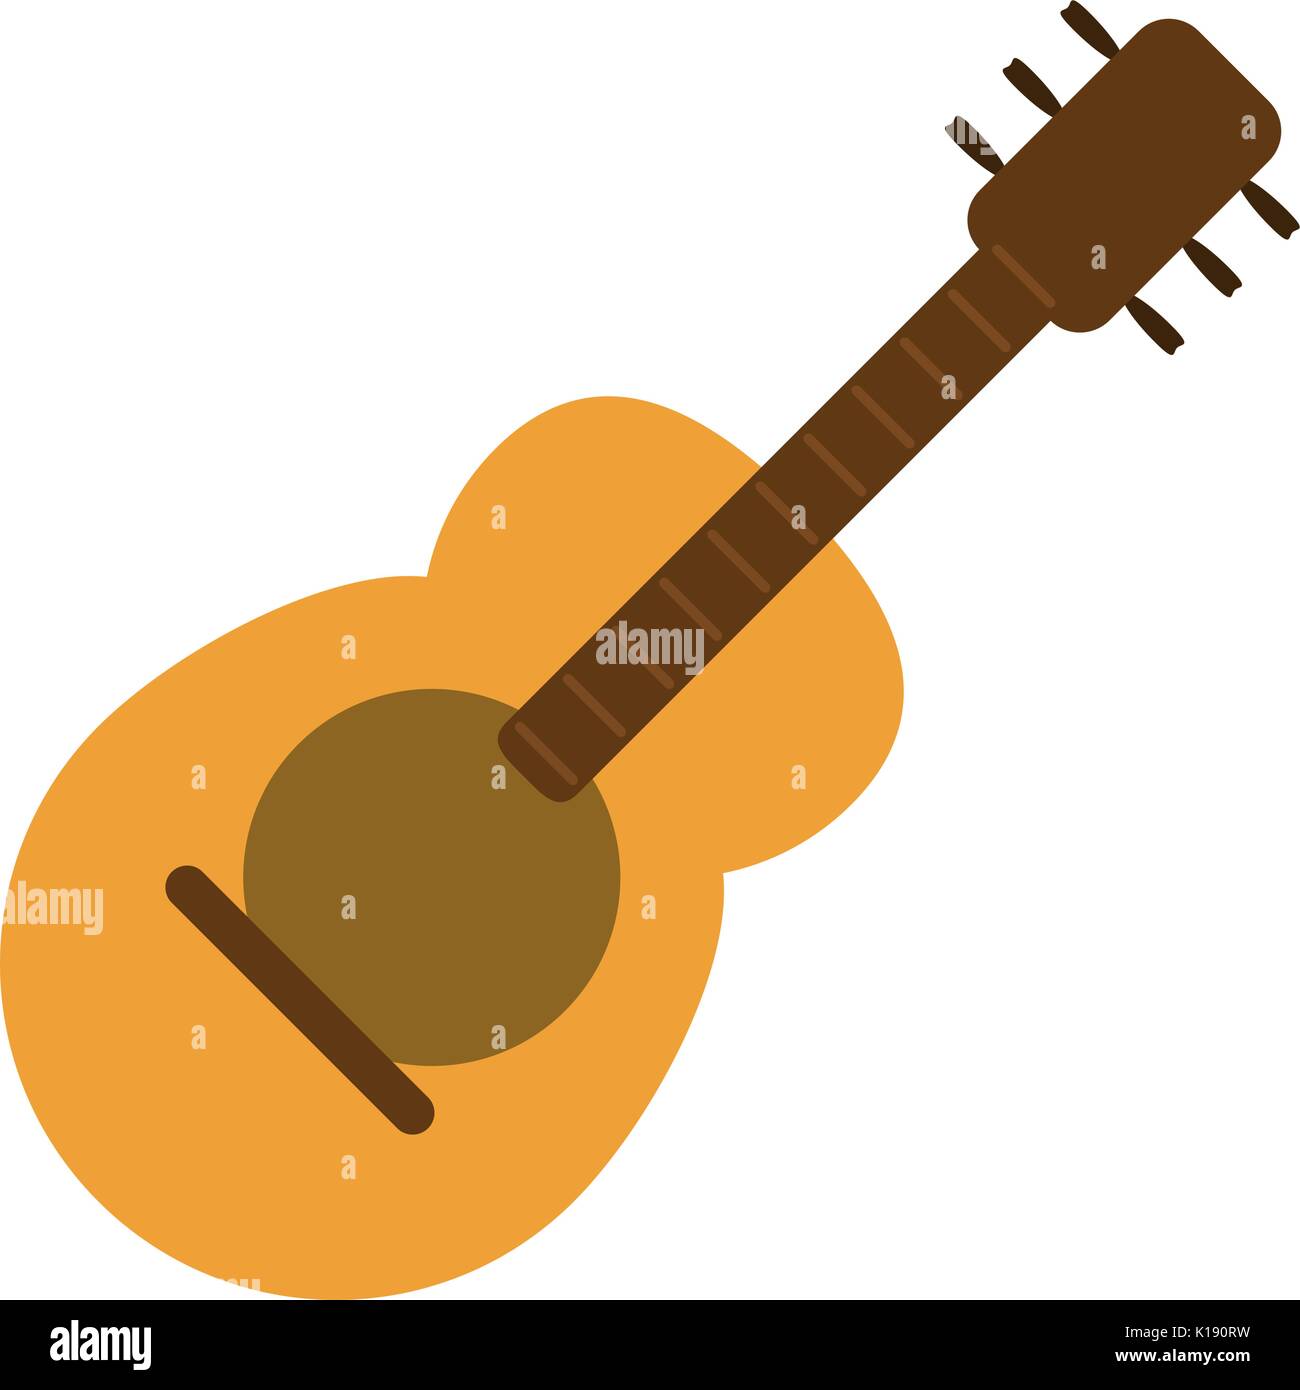 acoustic guitar icon image Stock Vector